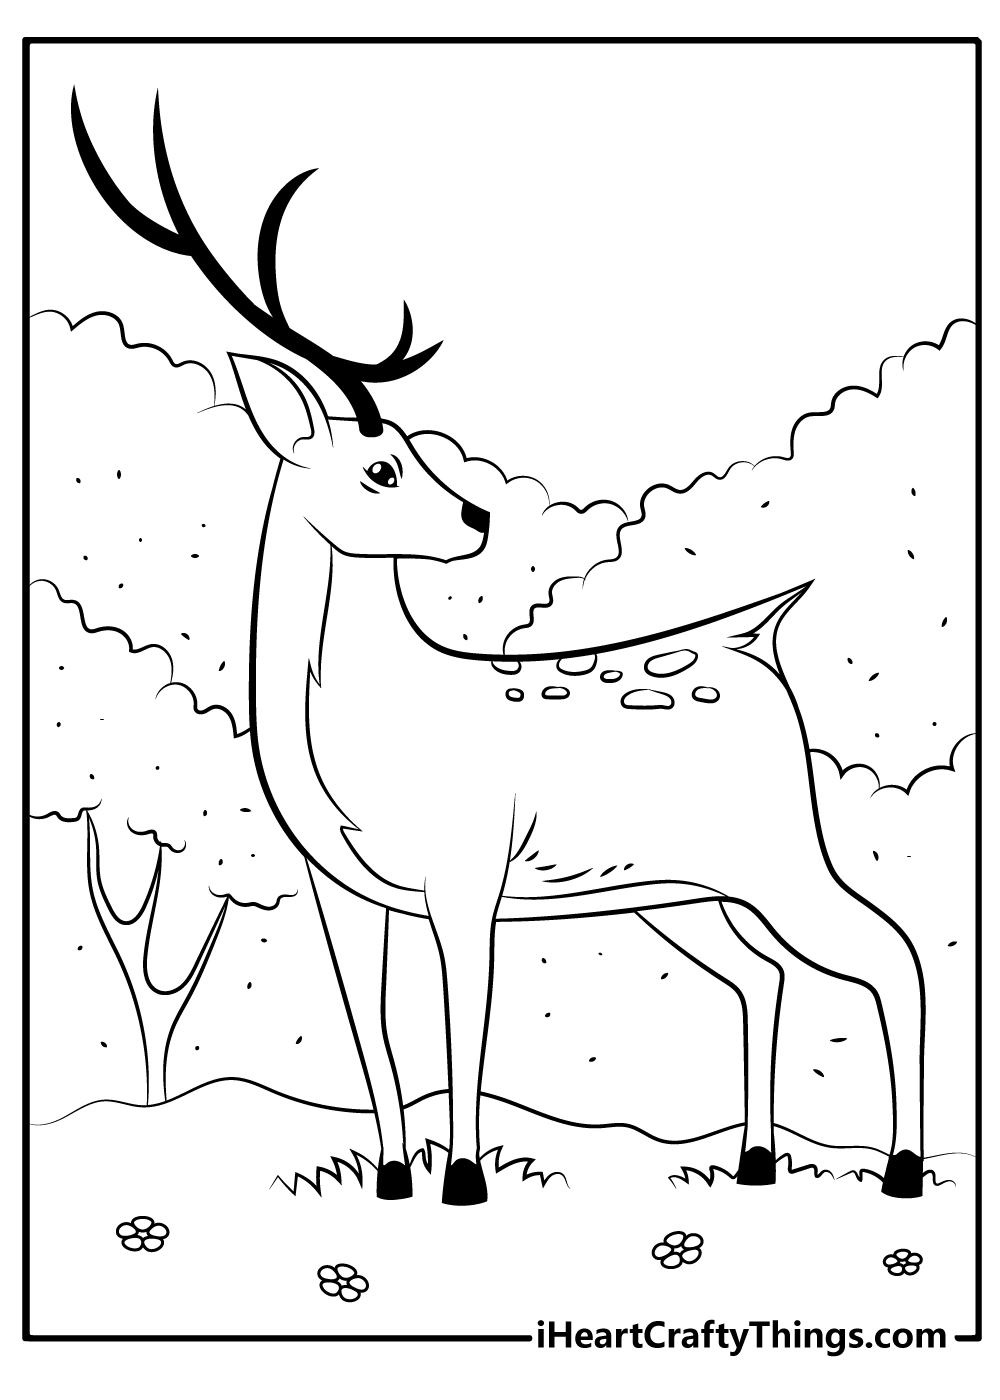 200+ Deer Coloring Pages for Adults: Explore Your Creativity 197